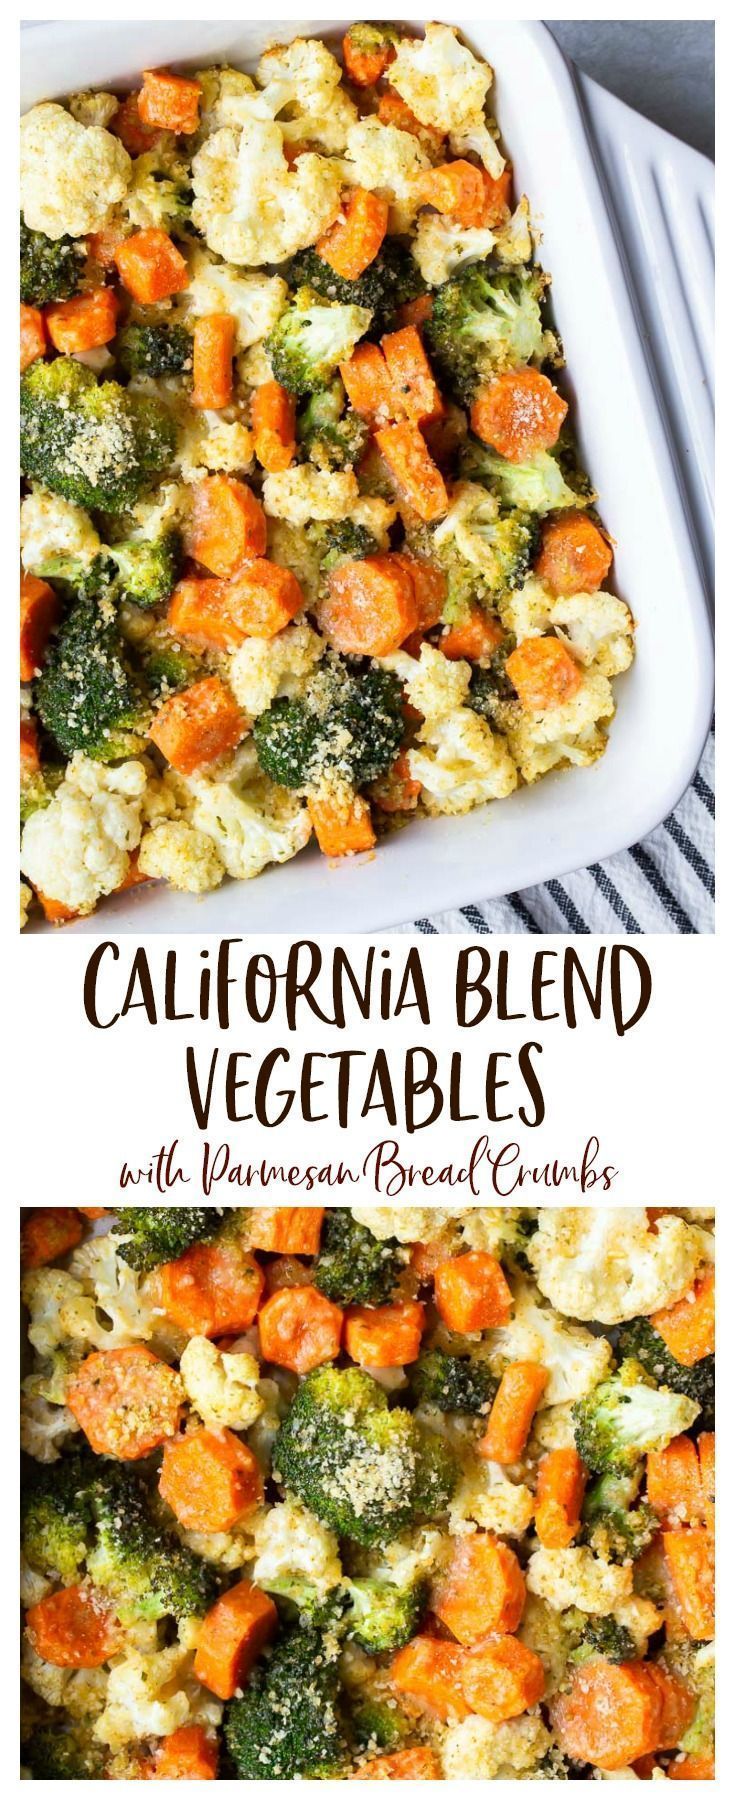 California Blend Vegetables with Parmesan Bread Crumbs -   19 thanksgiving recipes side dishes healthy ideas